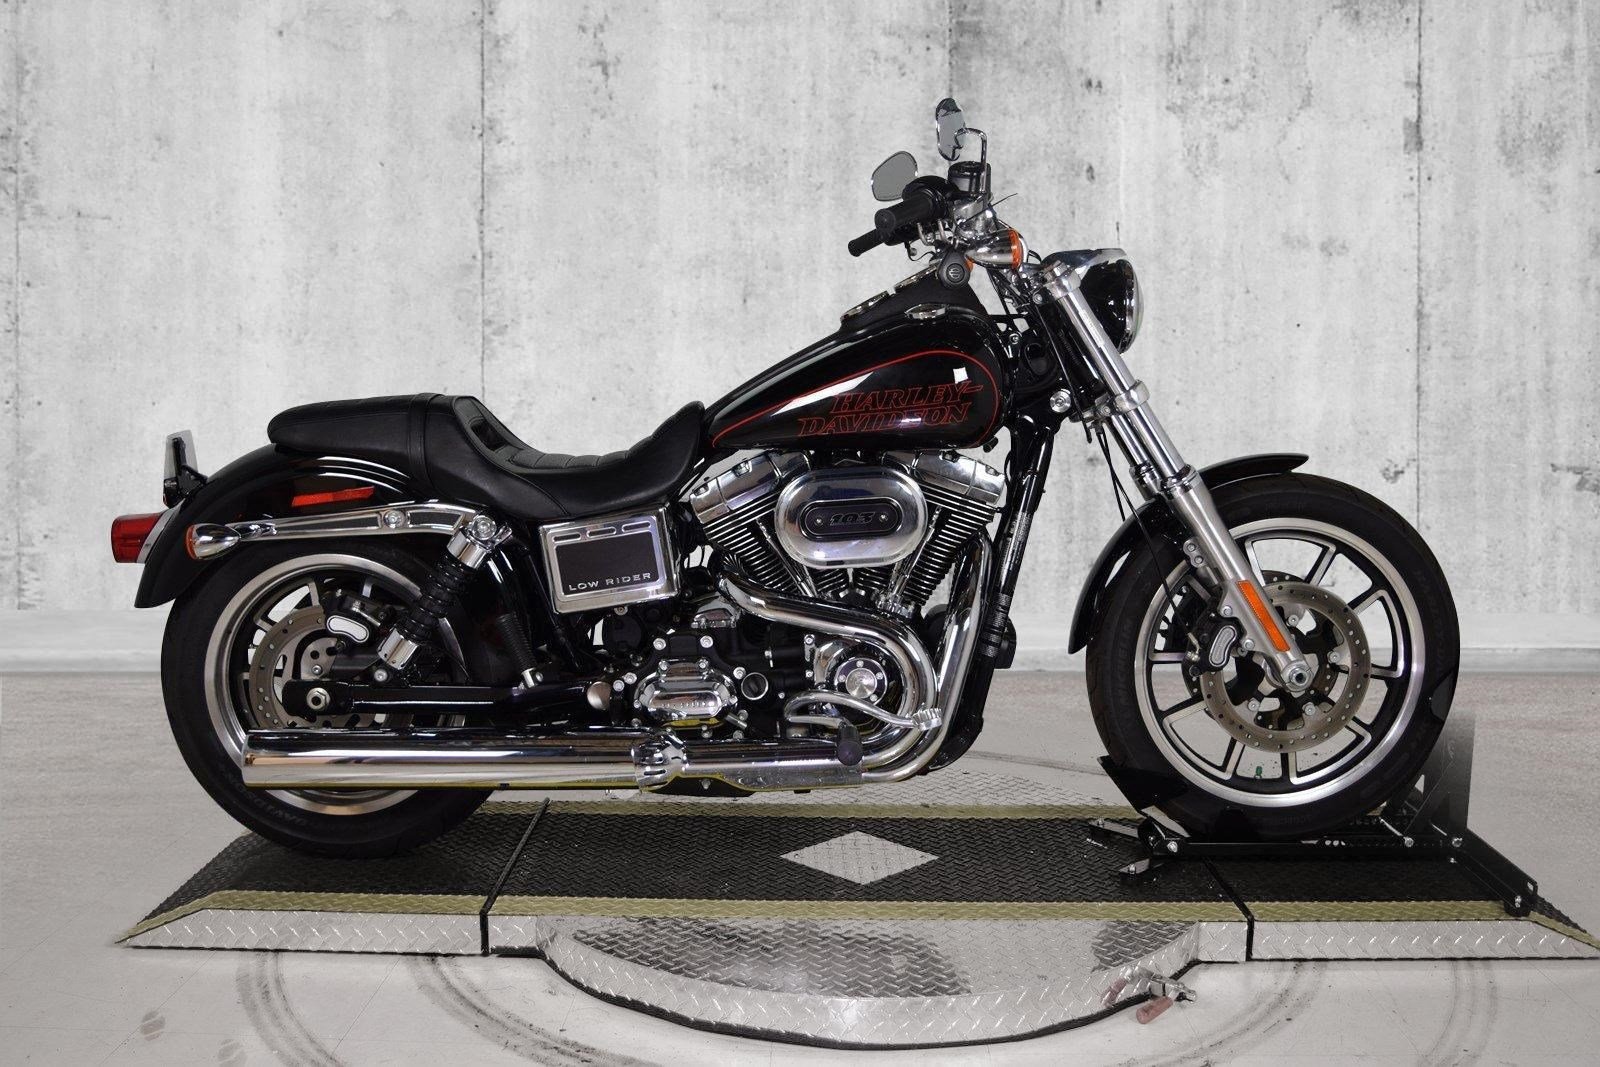 Pre-Owned 2017 Harley-Davidson Dyna Low Rider FXDL Dyna in Riverside # ...